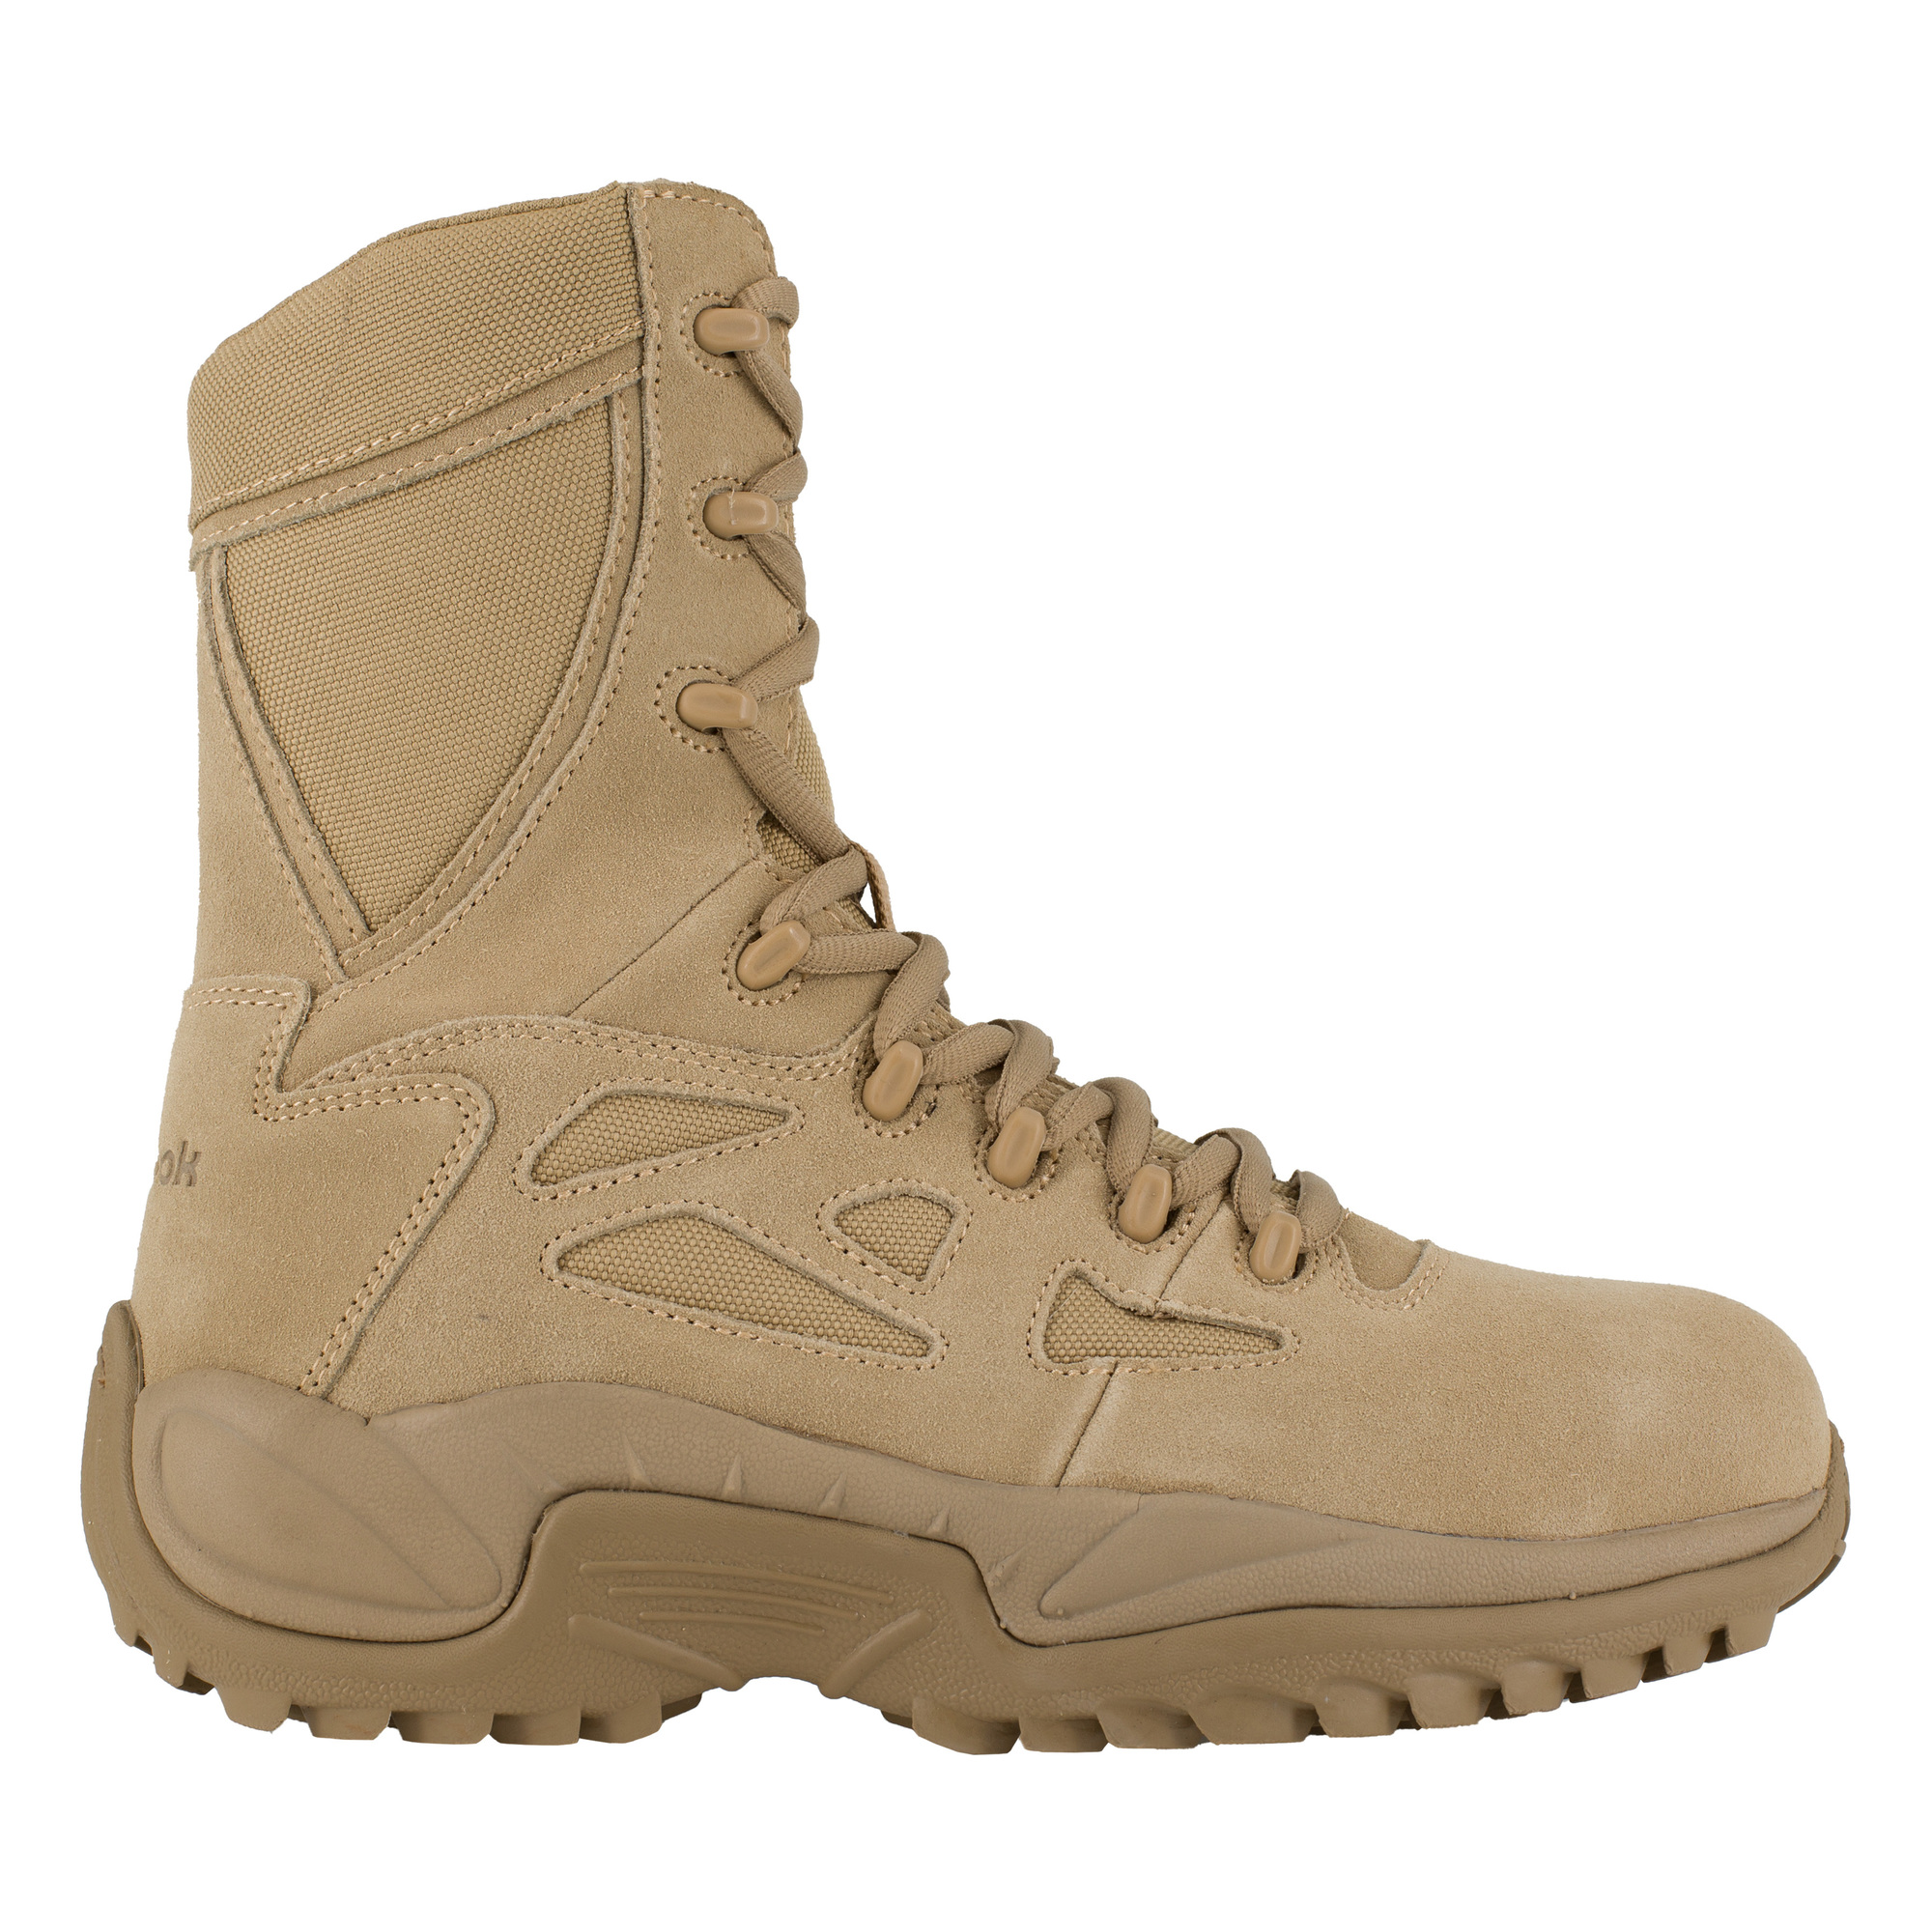 Reebok, 8Inch Stealth Tactical Boot with Side Zipper, Size 7 1/2, Width Medium, Color Desert Tan, Model RB894 -  RB894-M-07.5